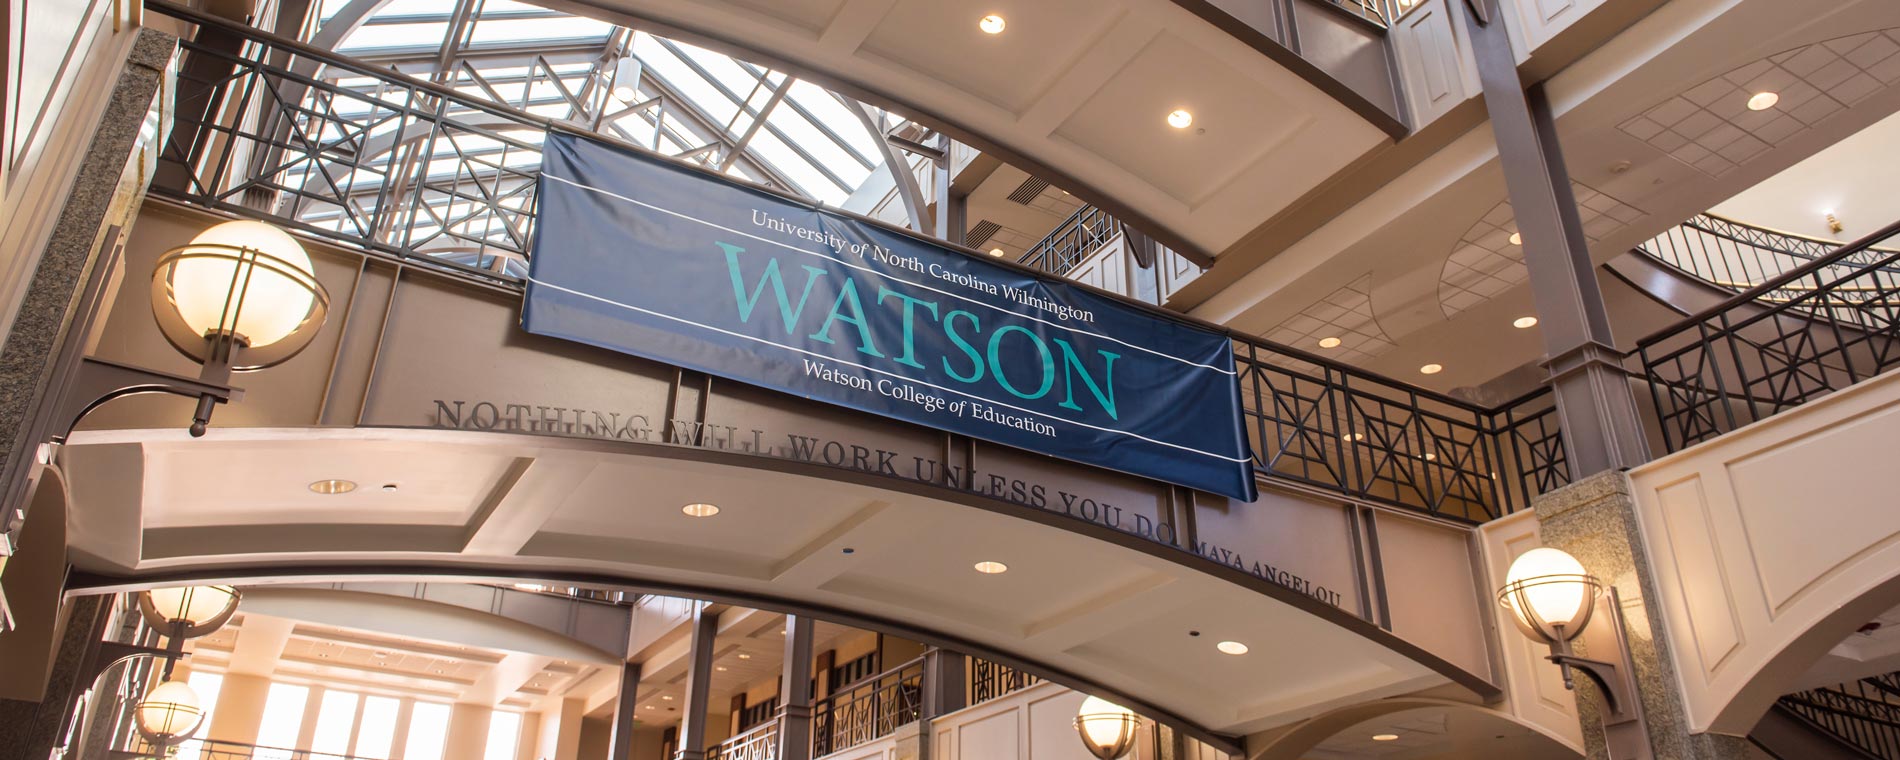 Photo of the Watson College of Education